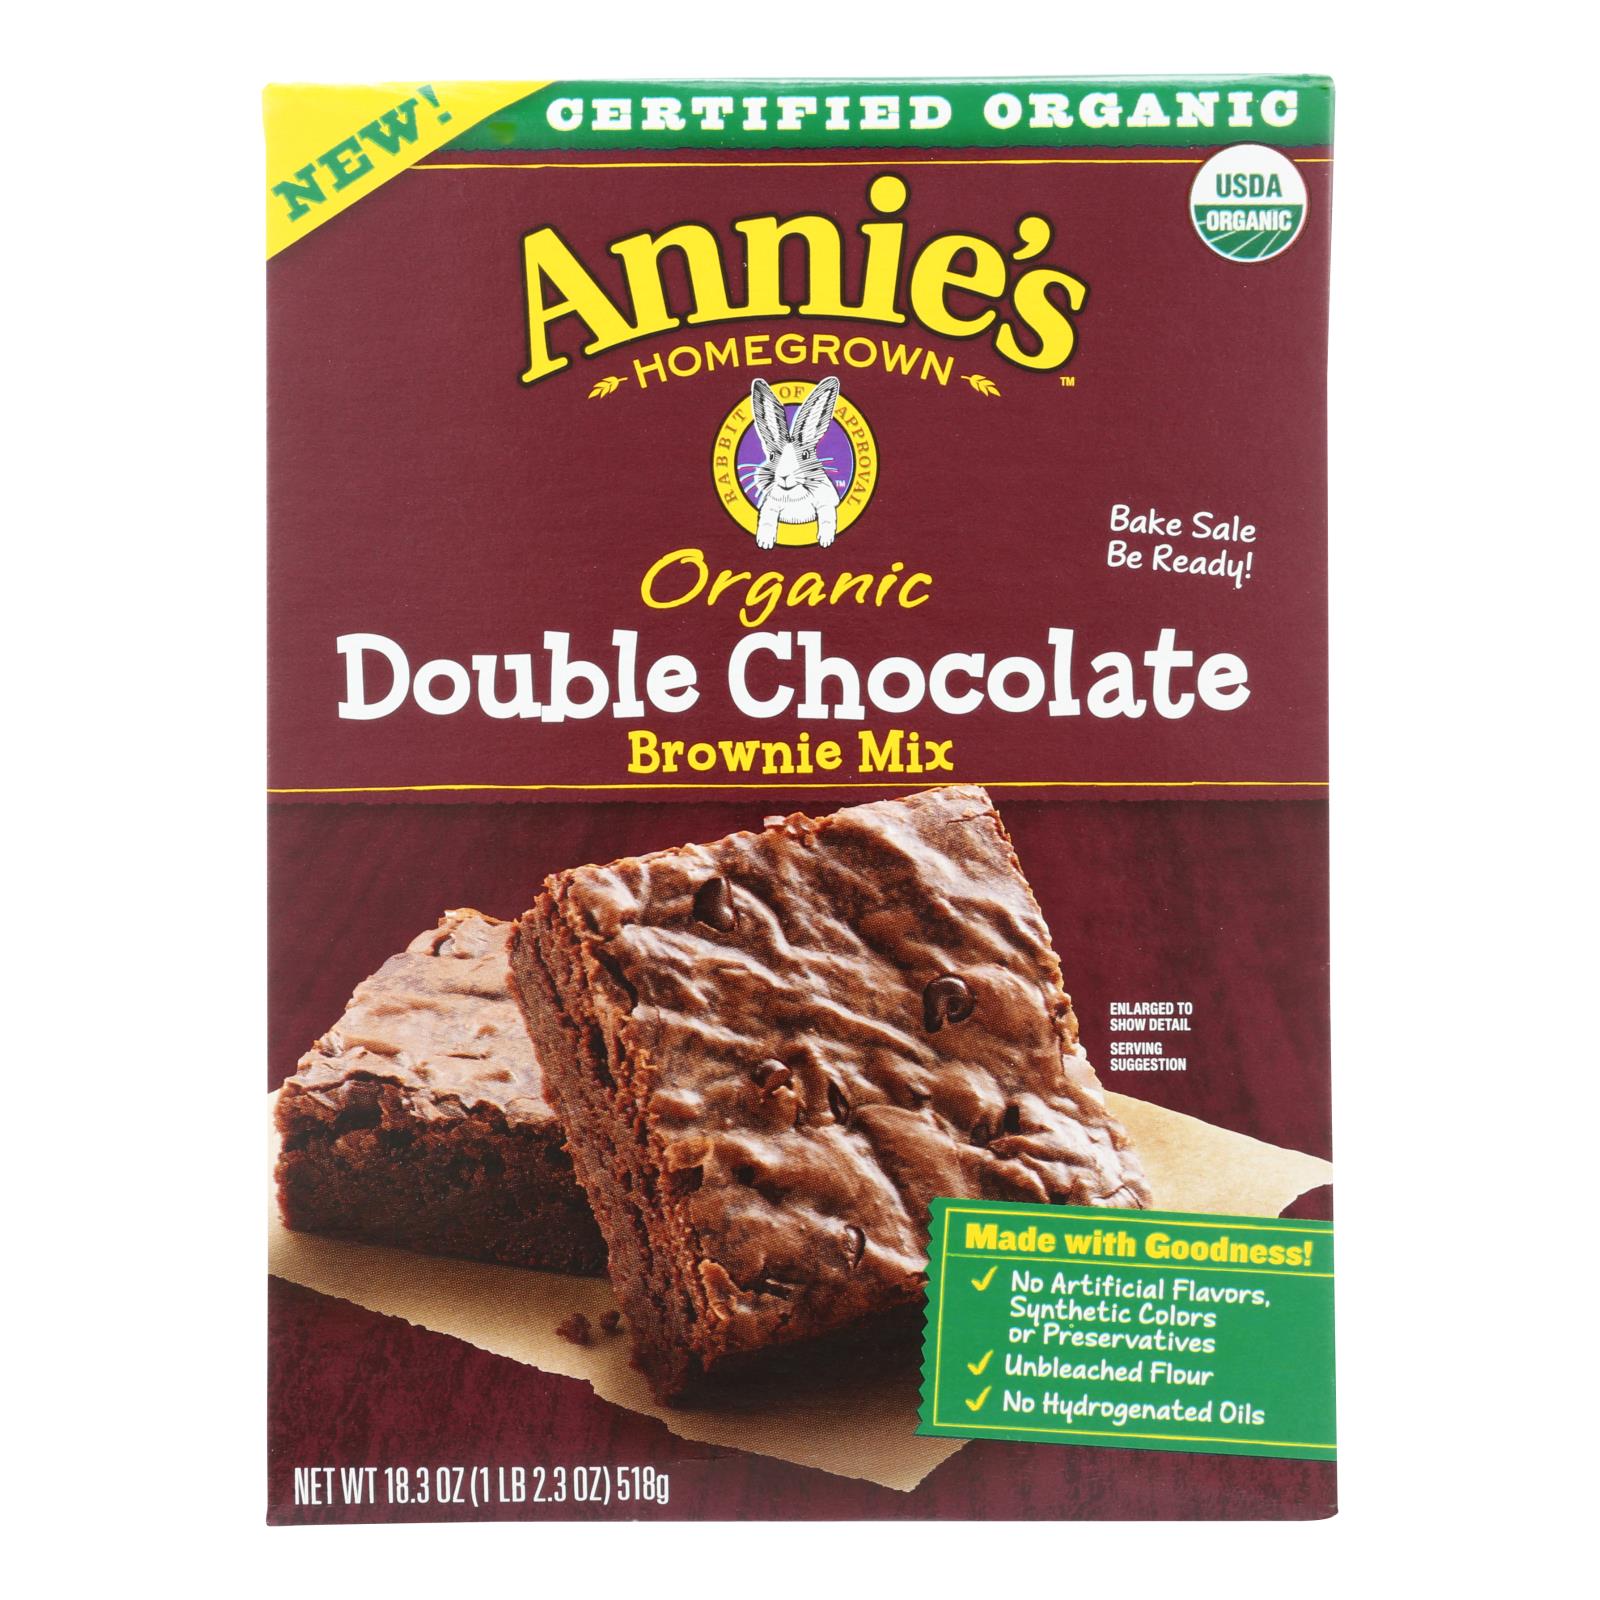 Annie'S Homegrown, Annie's Homegrown Organic Double Chocolate Brownie Mix - Case of 8 - 18.3 oz. (Pack of 8)